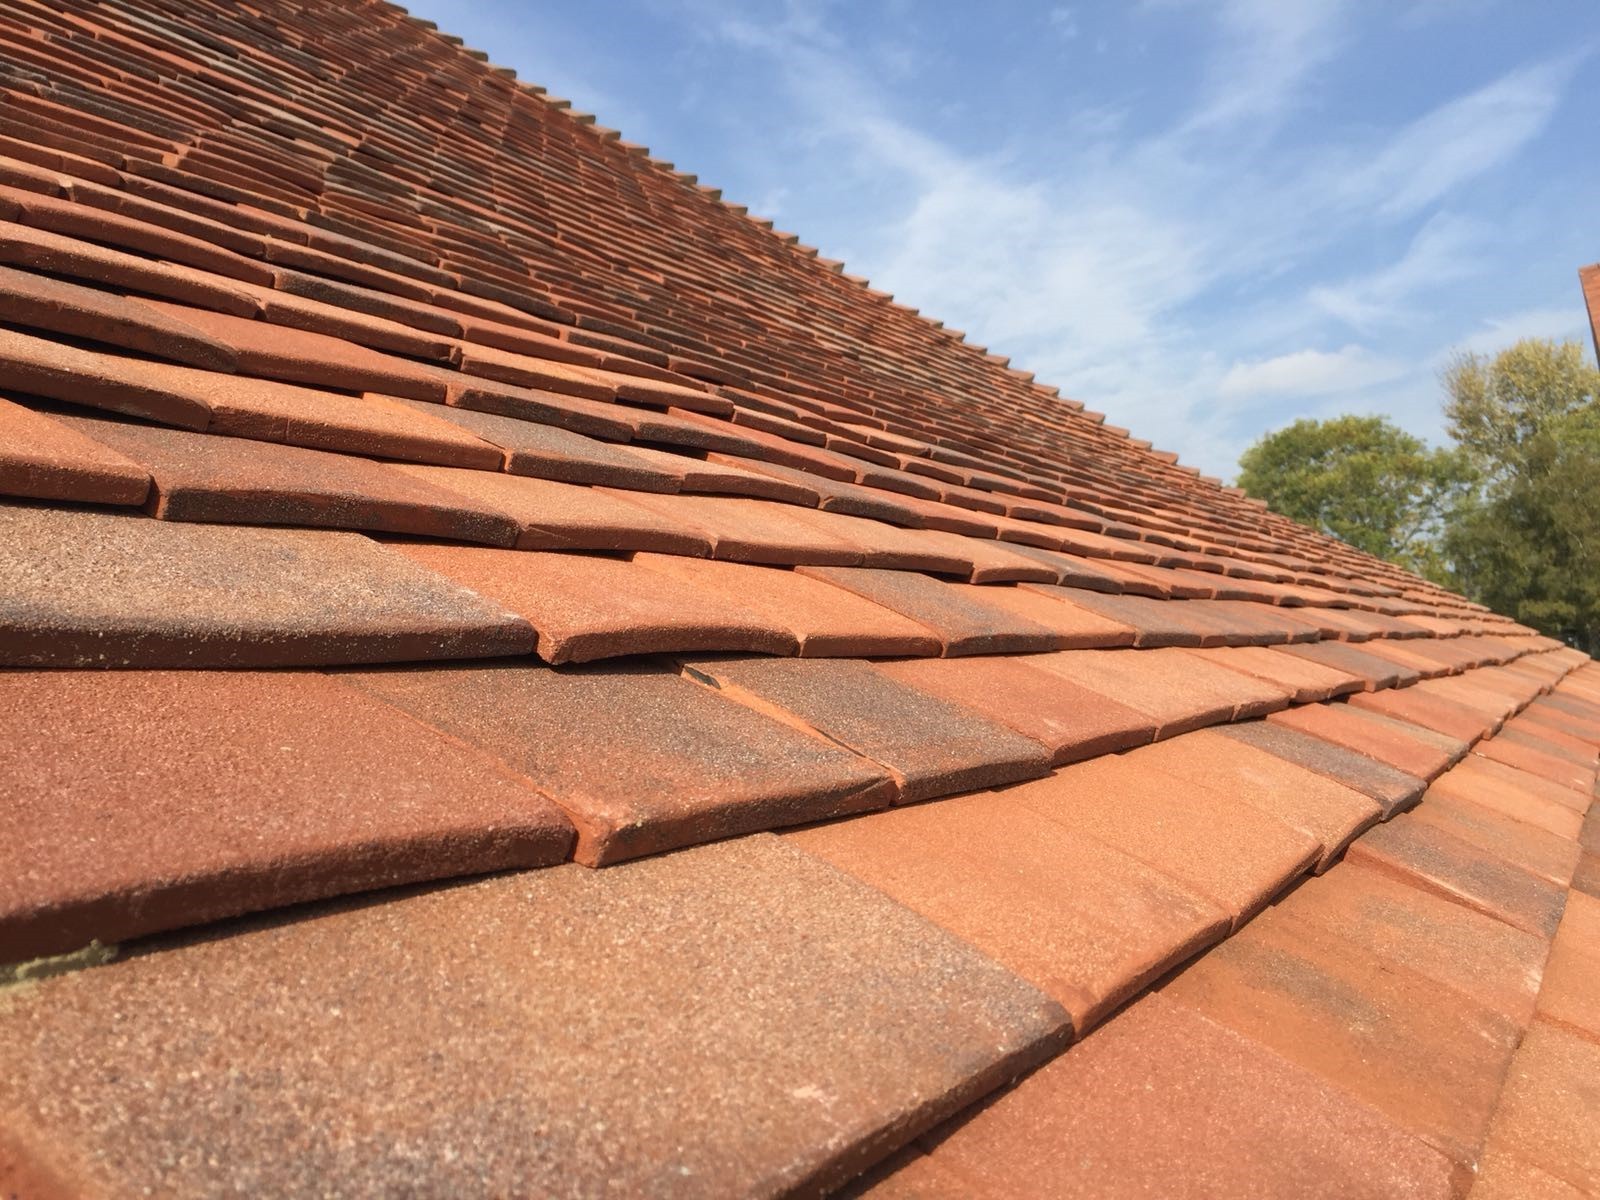 Heritage Clay Tiles Ltd Linkedin, Clay Roof Tiles Home Depot